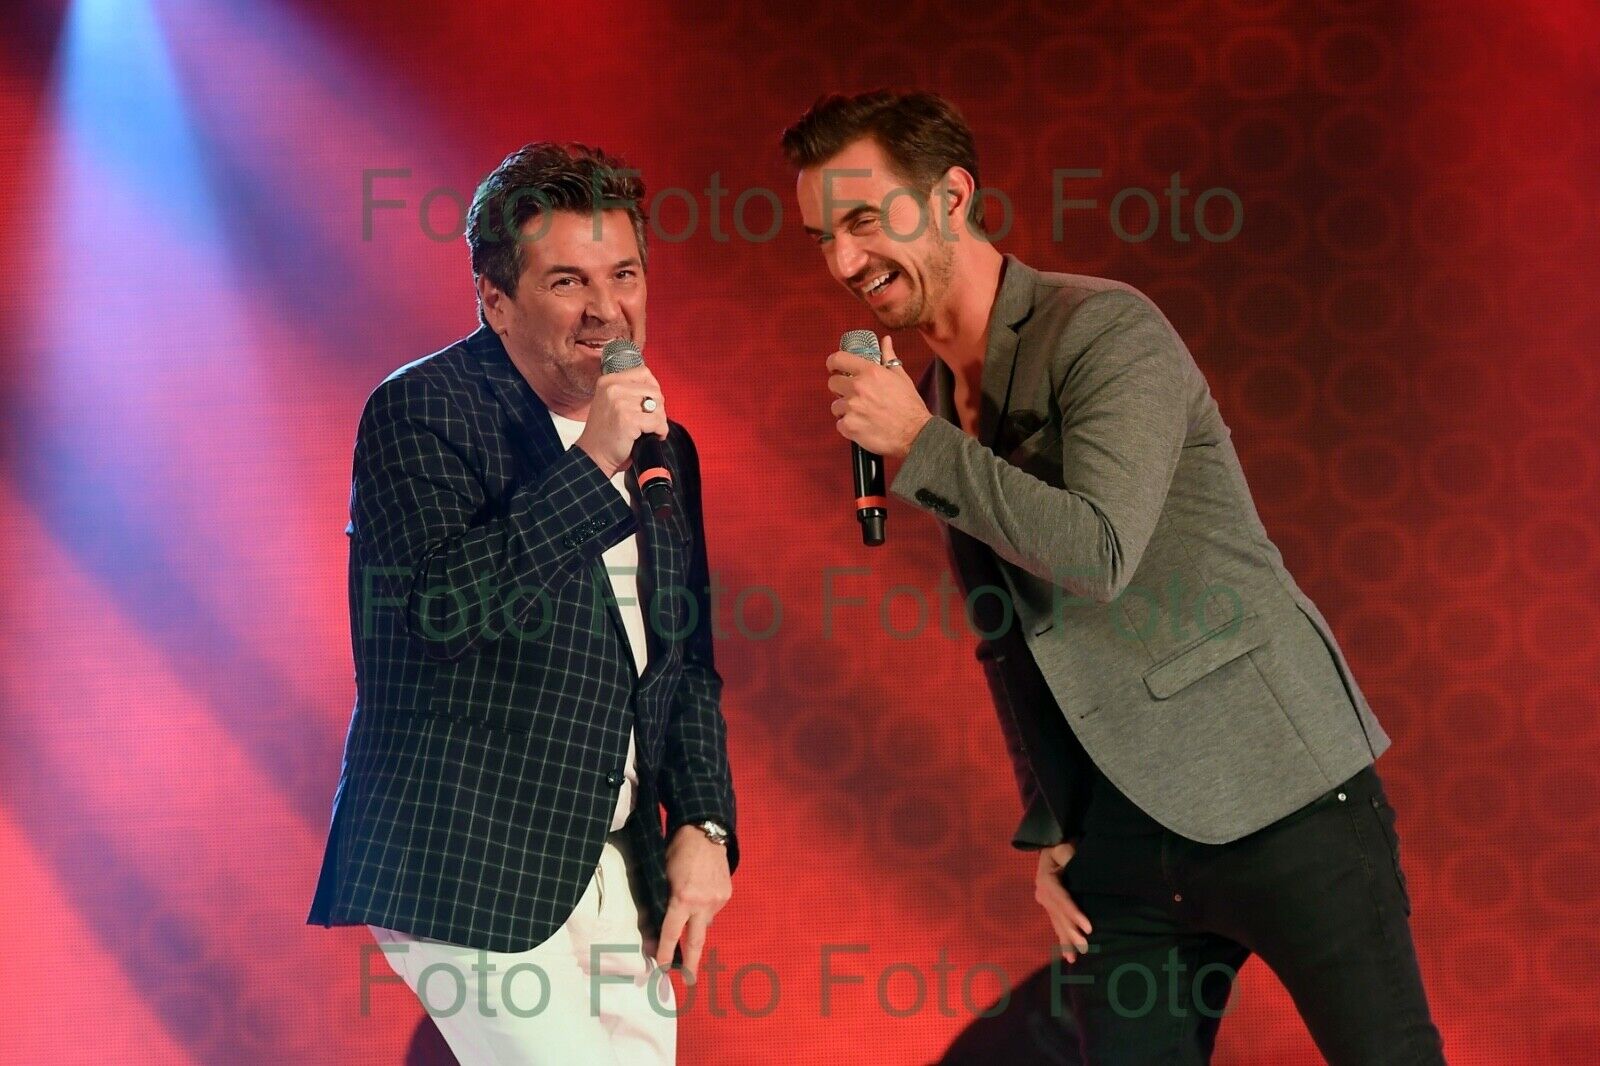 Thomas Anders - Florian Silbereisen Photo Poster painting 20 X 30 CM Without Autograph (Be-1